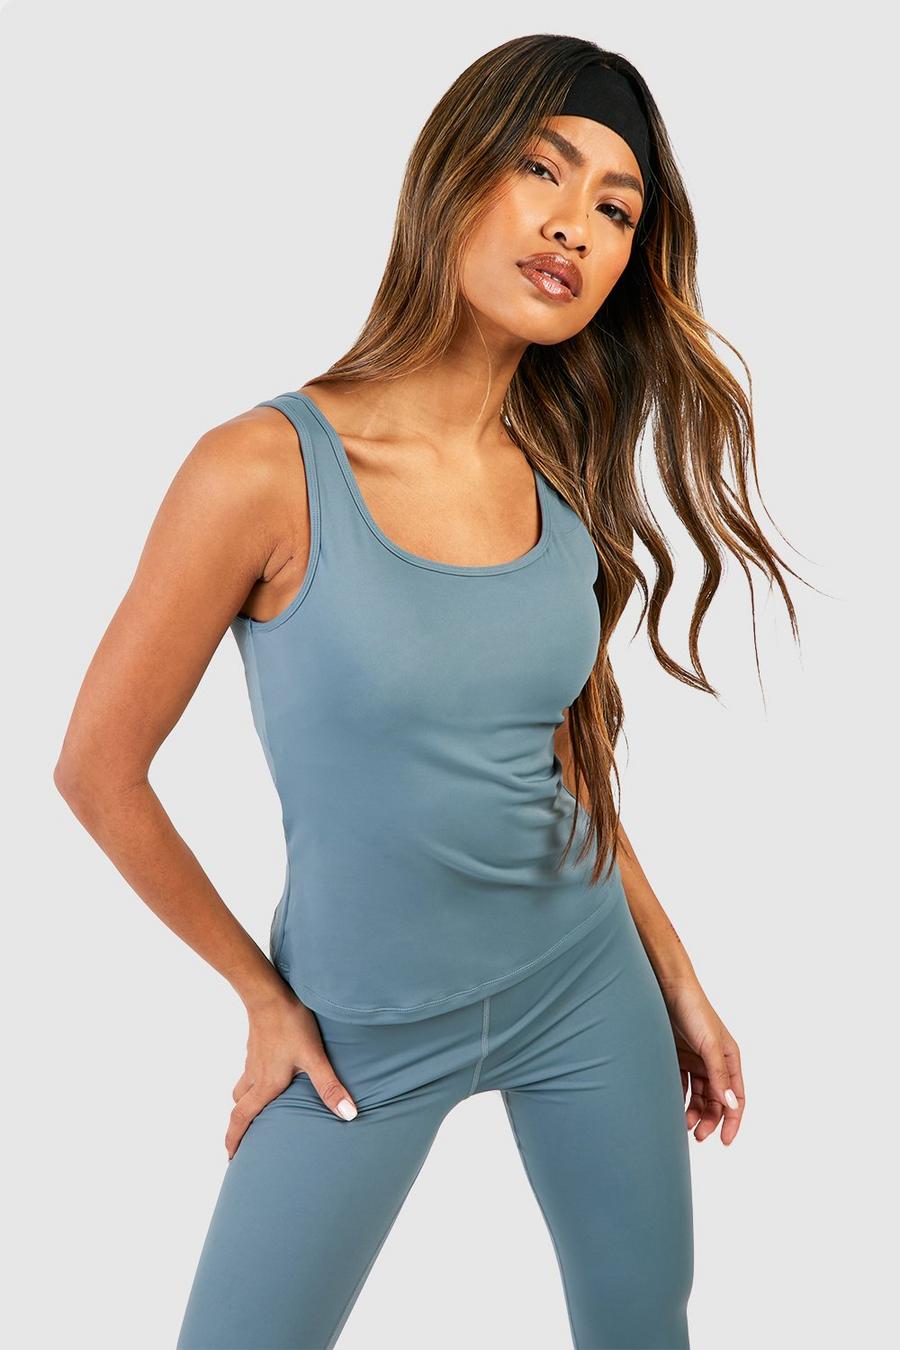 Dsgn Studio Supersoft Peached Sculpt Padded Tank Top Top